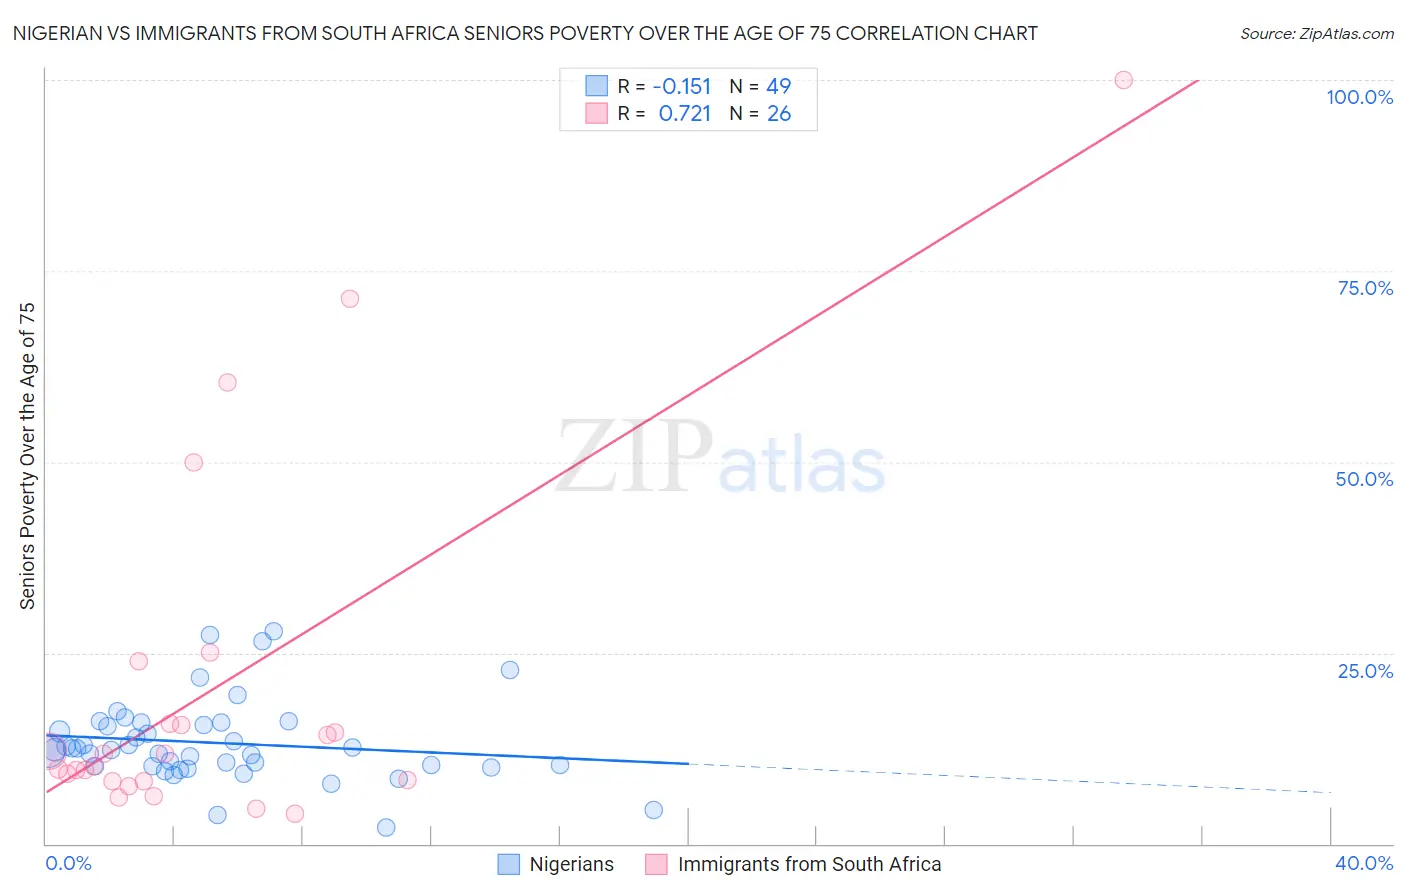 Nigerian vs Immigrants from South Africa Seniors Poverty Over the Age of 75